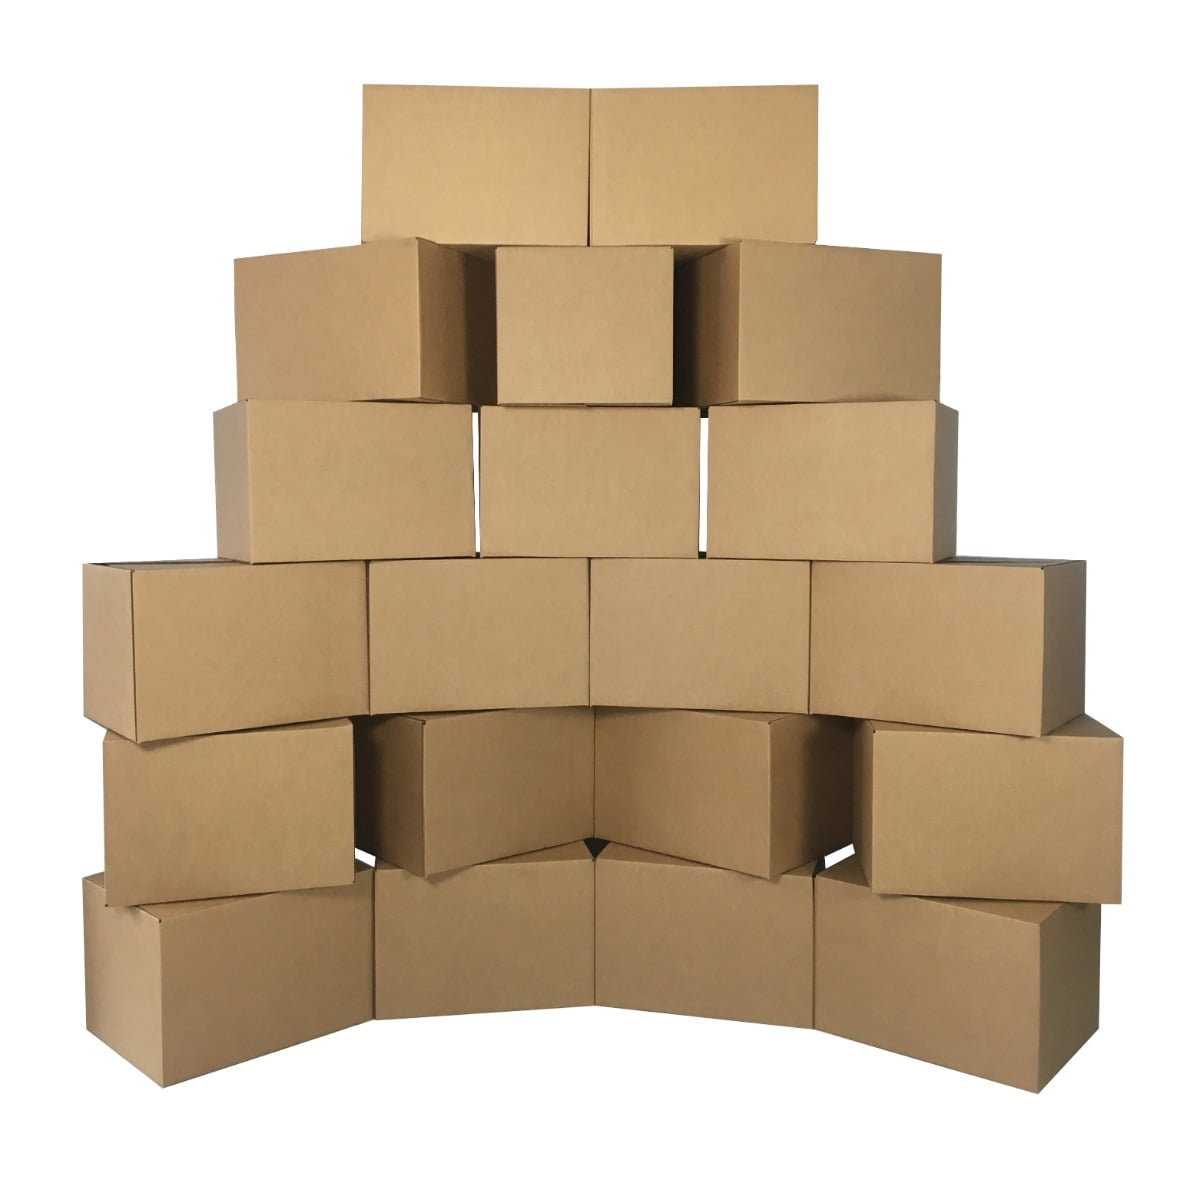 18"x12"x12" CARDBOARD MOVING BOXES DOUBLE WALL MAILING PACK POSTAL BOXES 20 